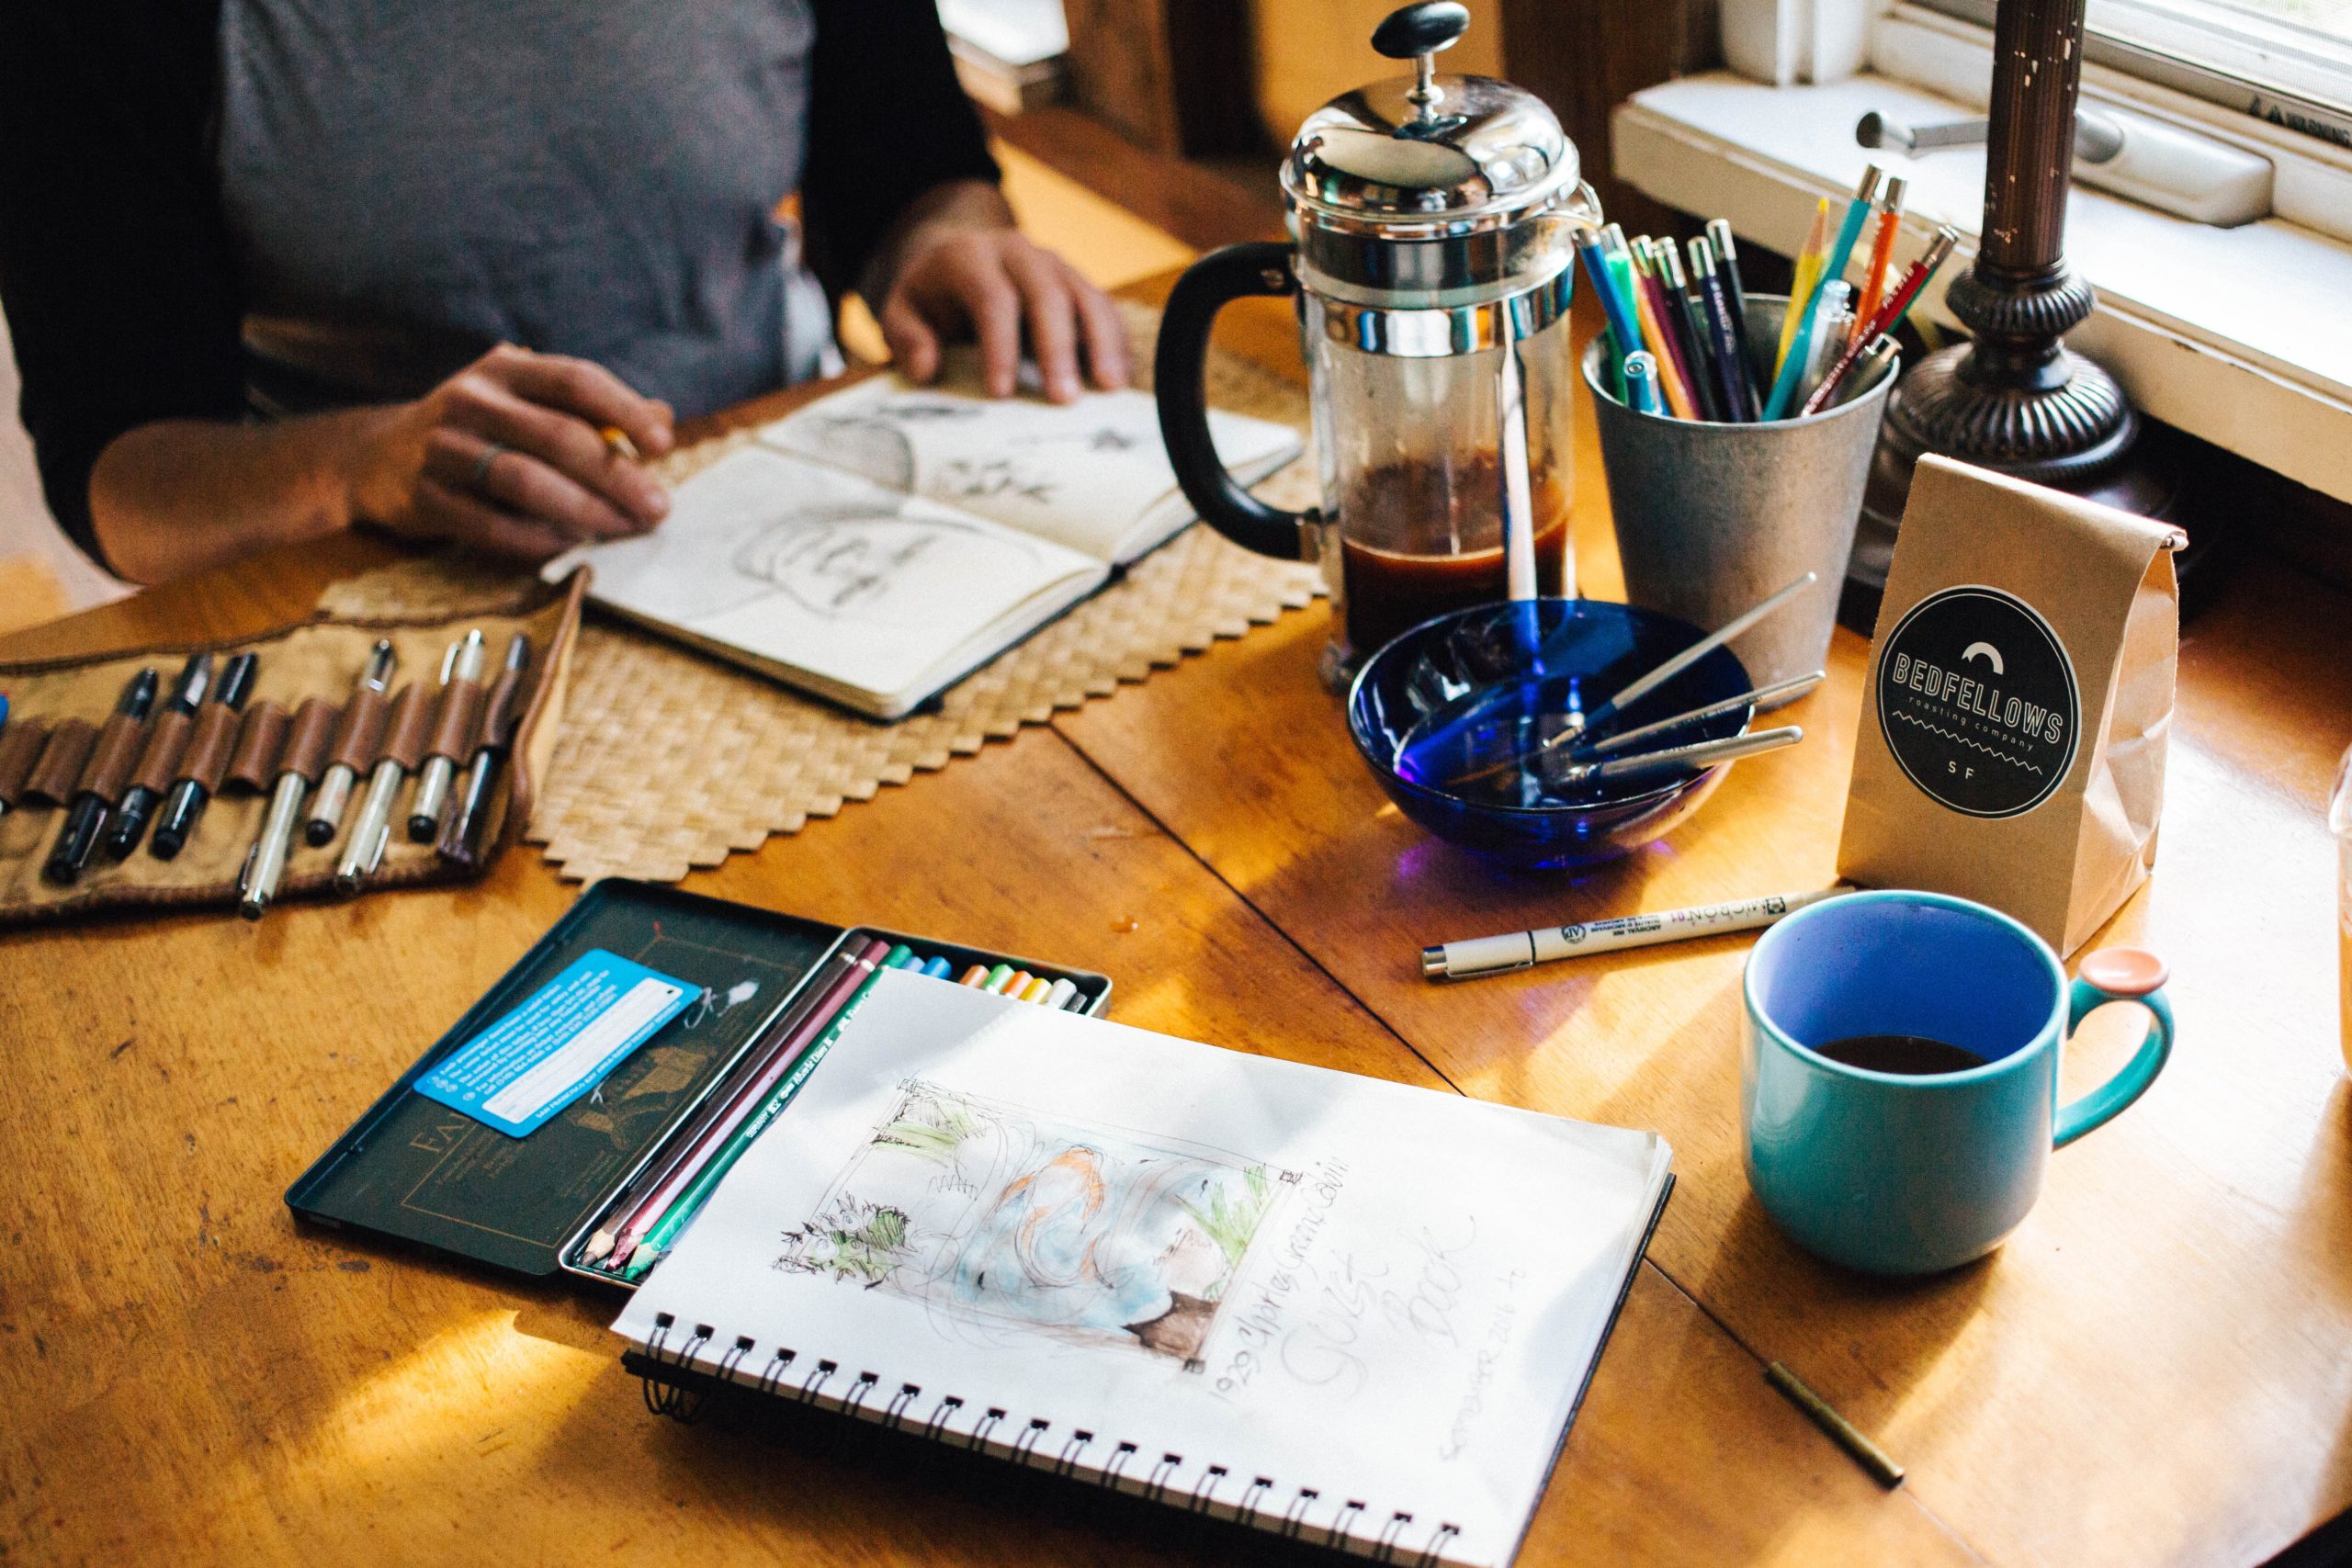 A person sits at a wood table with a journal open and various colored pencils and art supplies. A french press and coffee also sits on the table